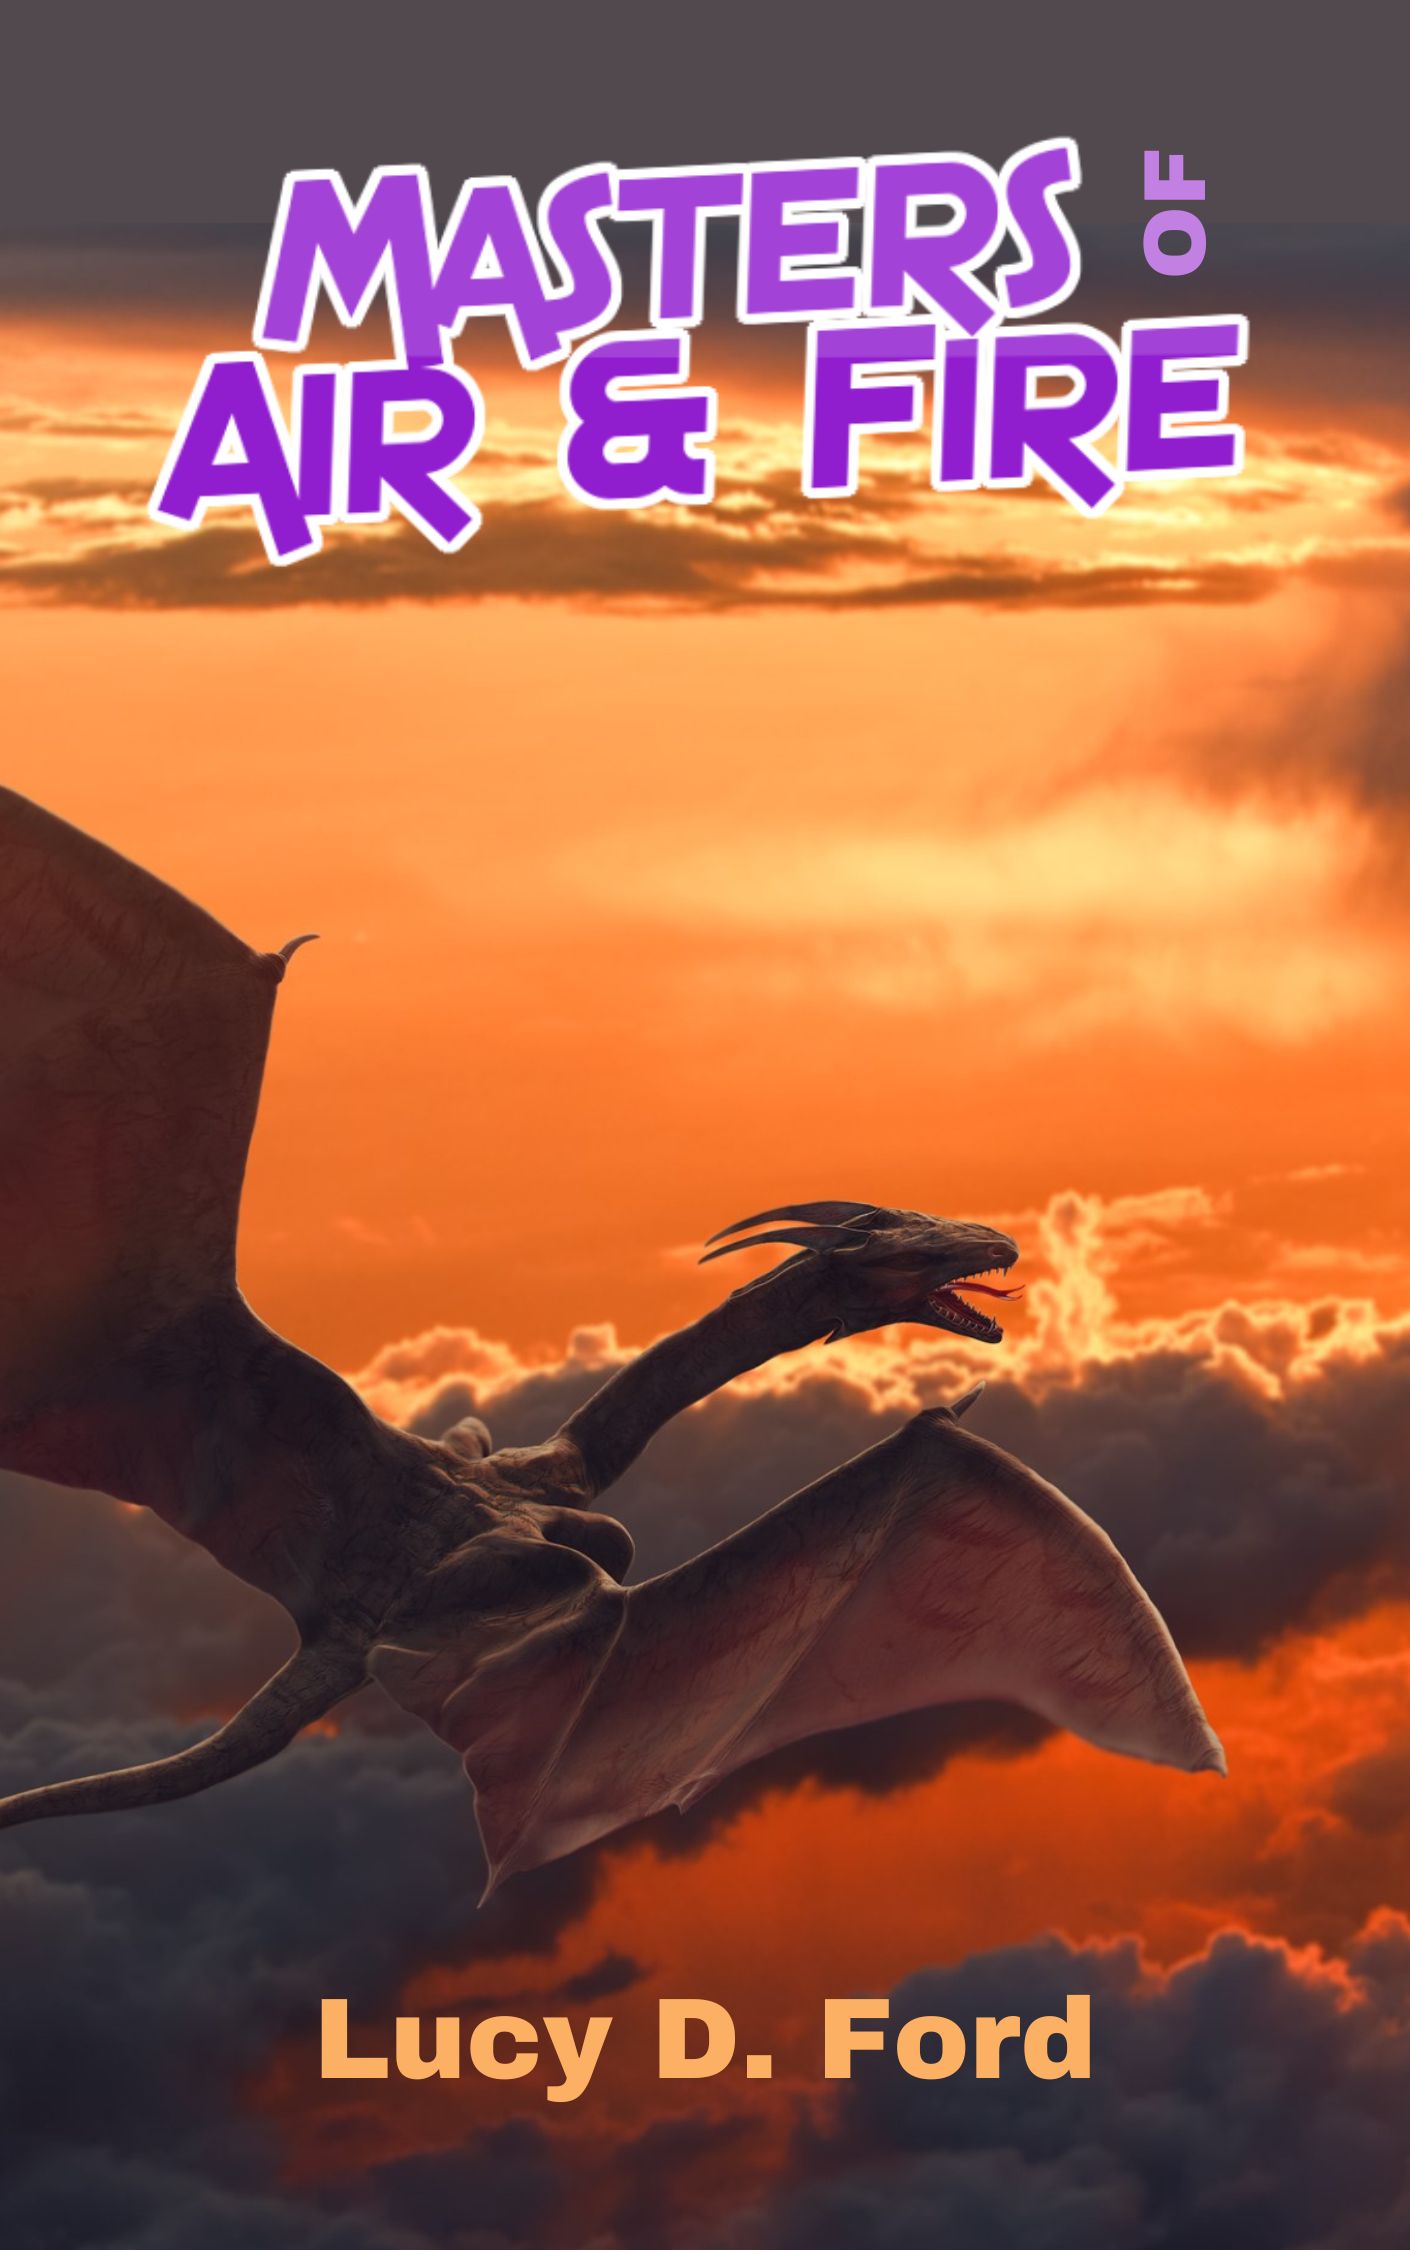 Masters of Air and Fire by Lucy D. Ford